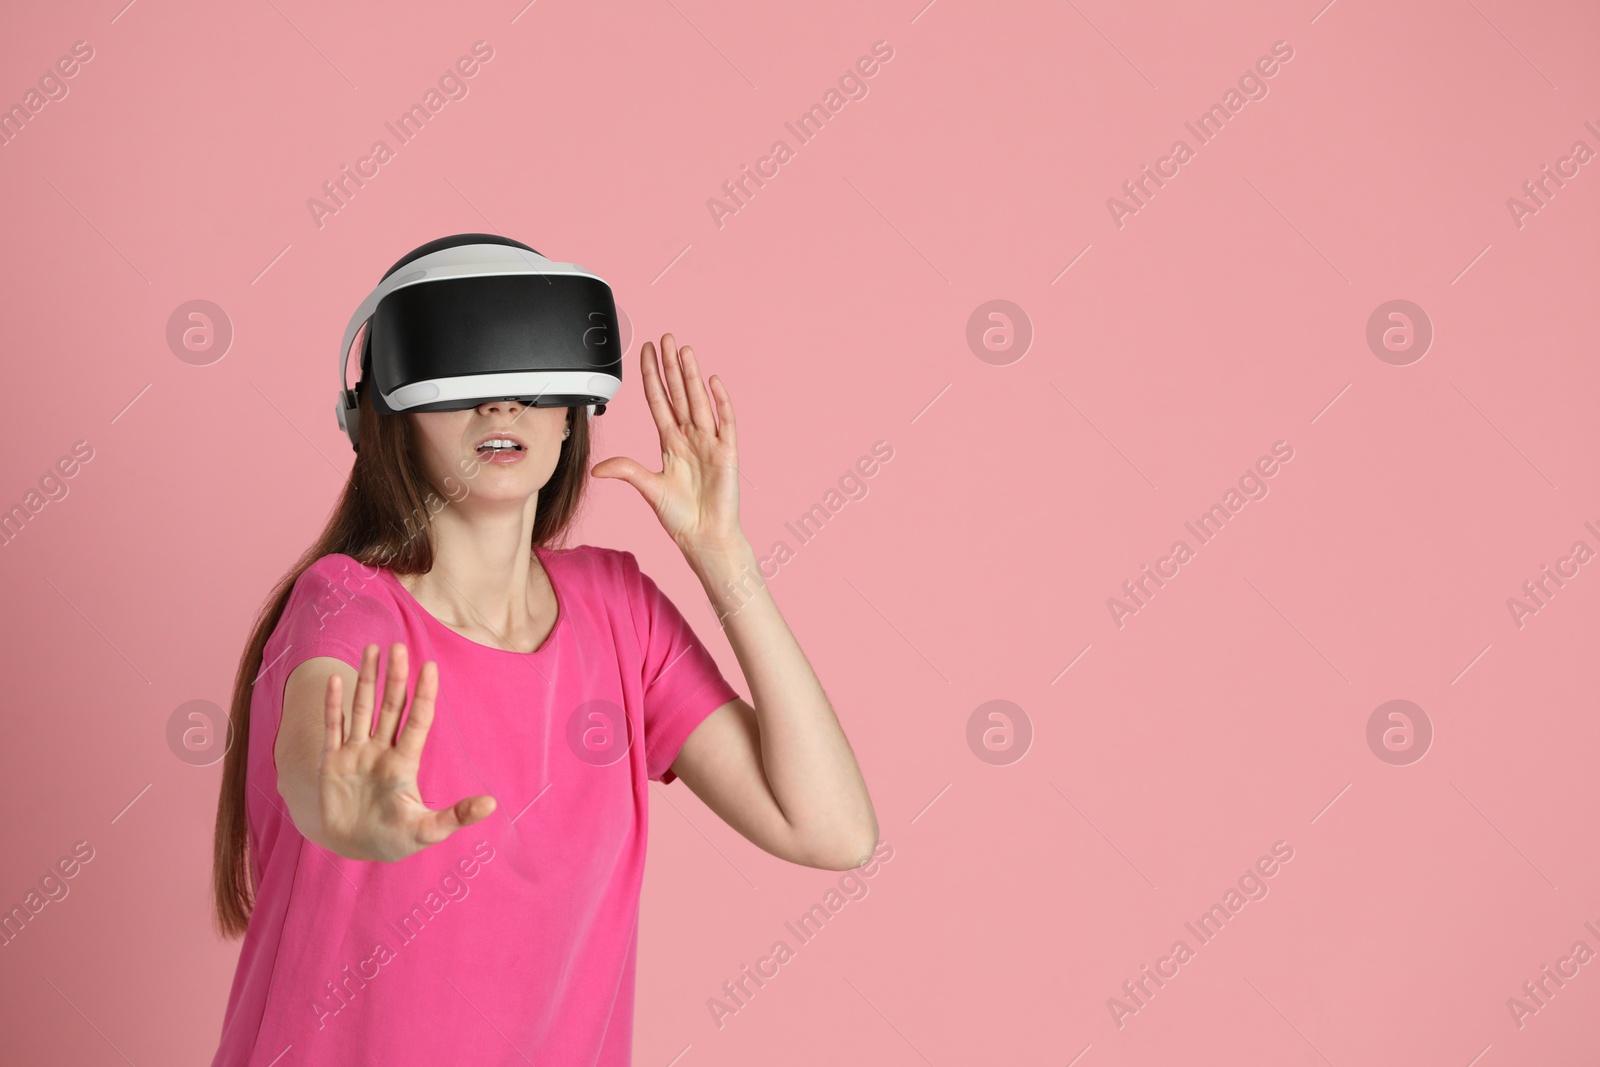 Photo of Surprised woman using virtual reality headset on pink background, space for text